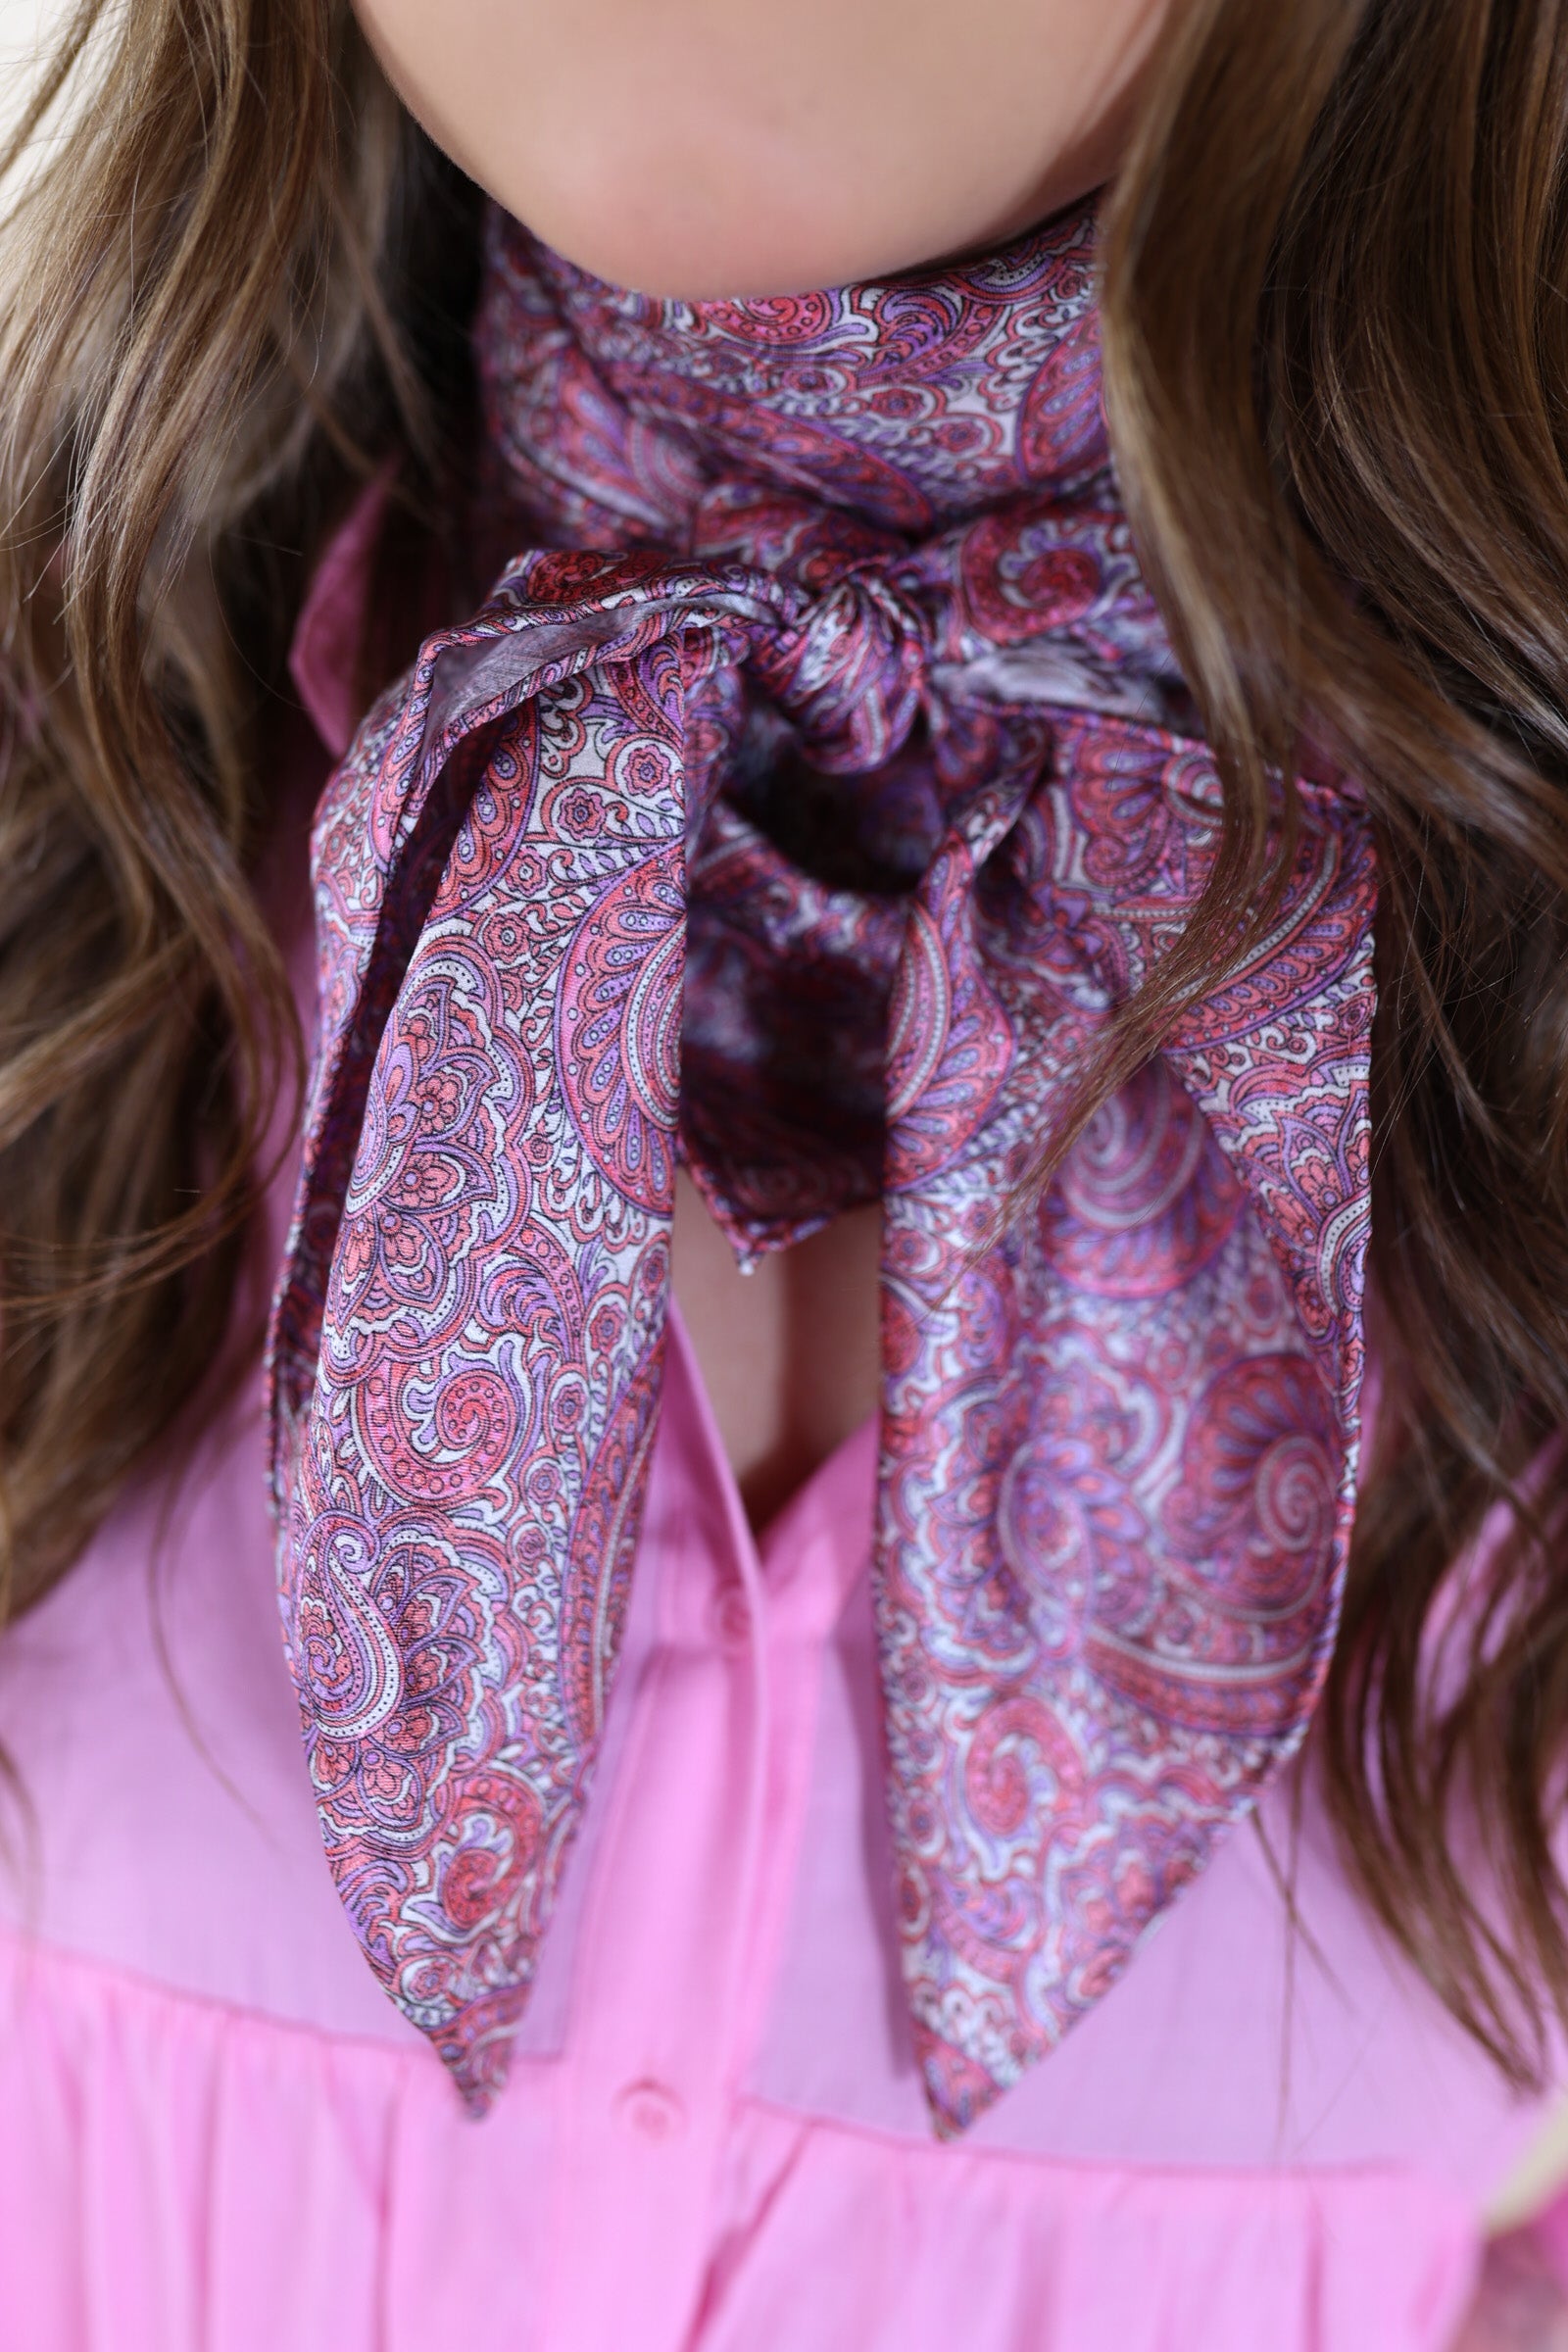 Paisley Wild Rag in Raspberry and White - Giddy Up Glamour Boutique